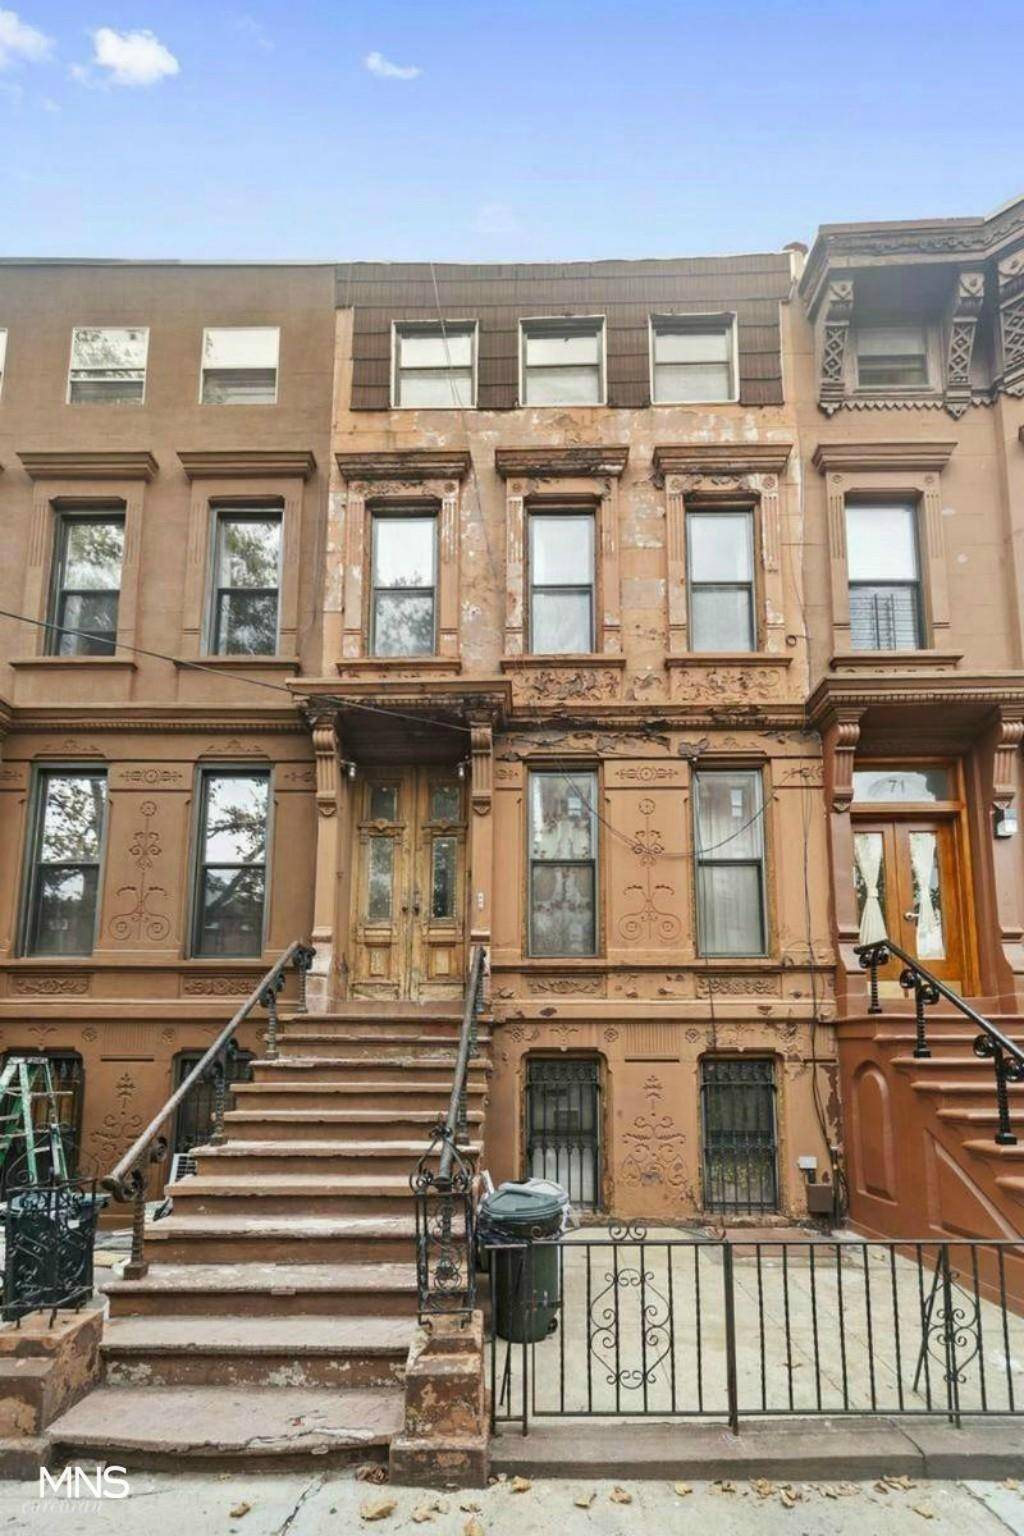 Bring your vision to life at 69 Decatur St, a 4 story Brownstone encompassing 3, 245sqft located in the heart of Bedford Stuyvesant.